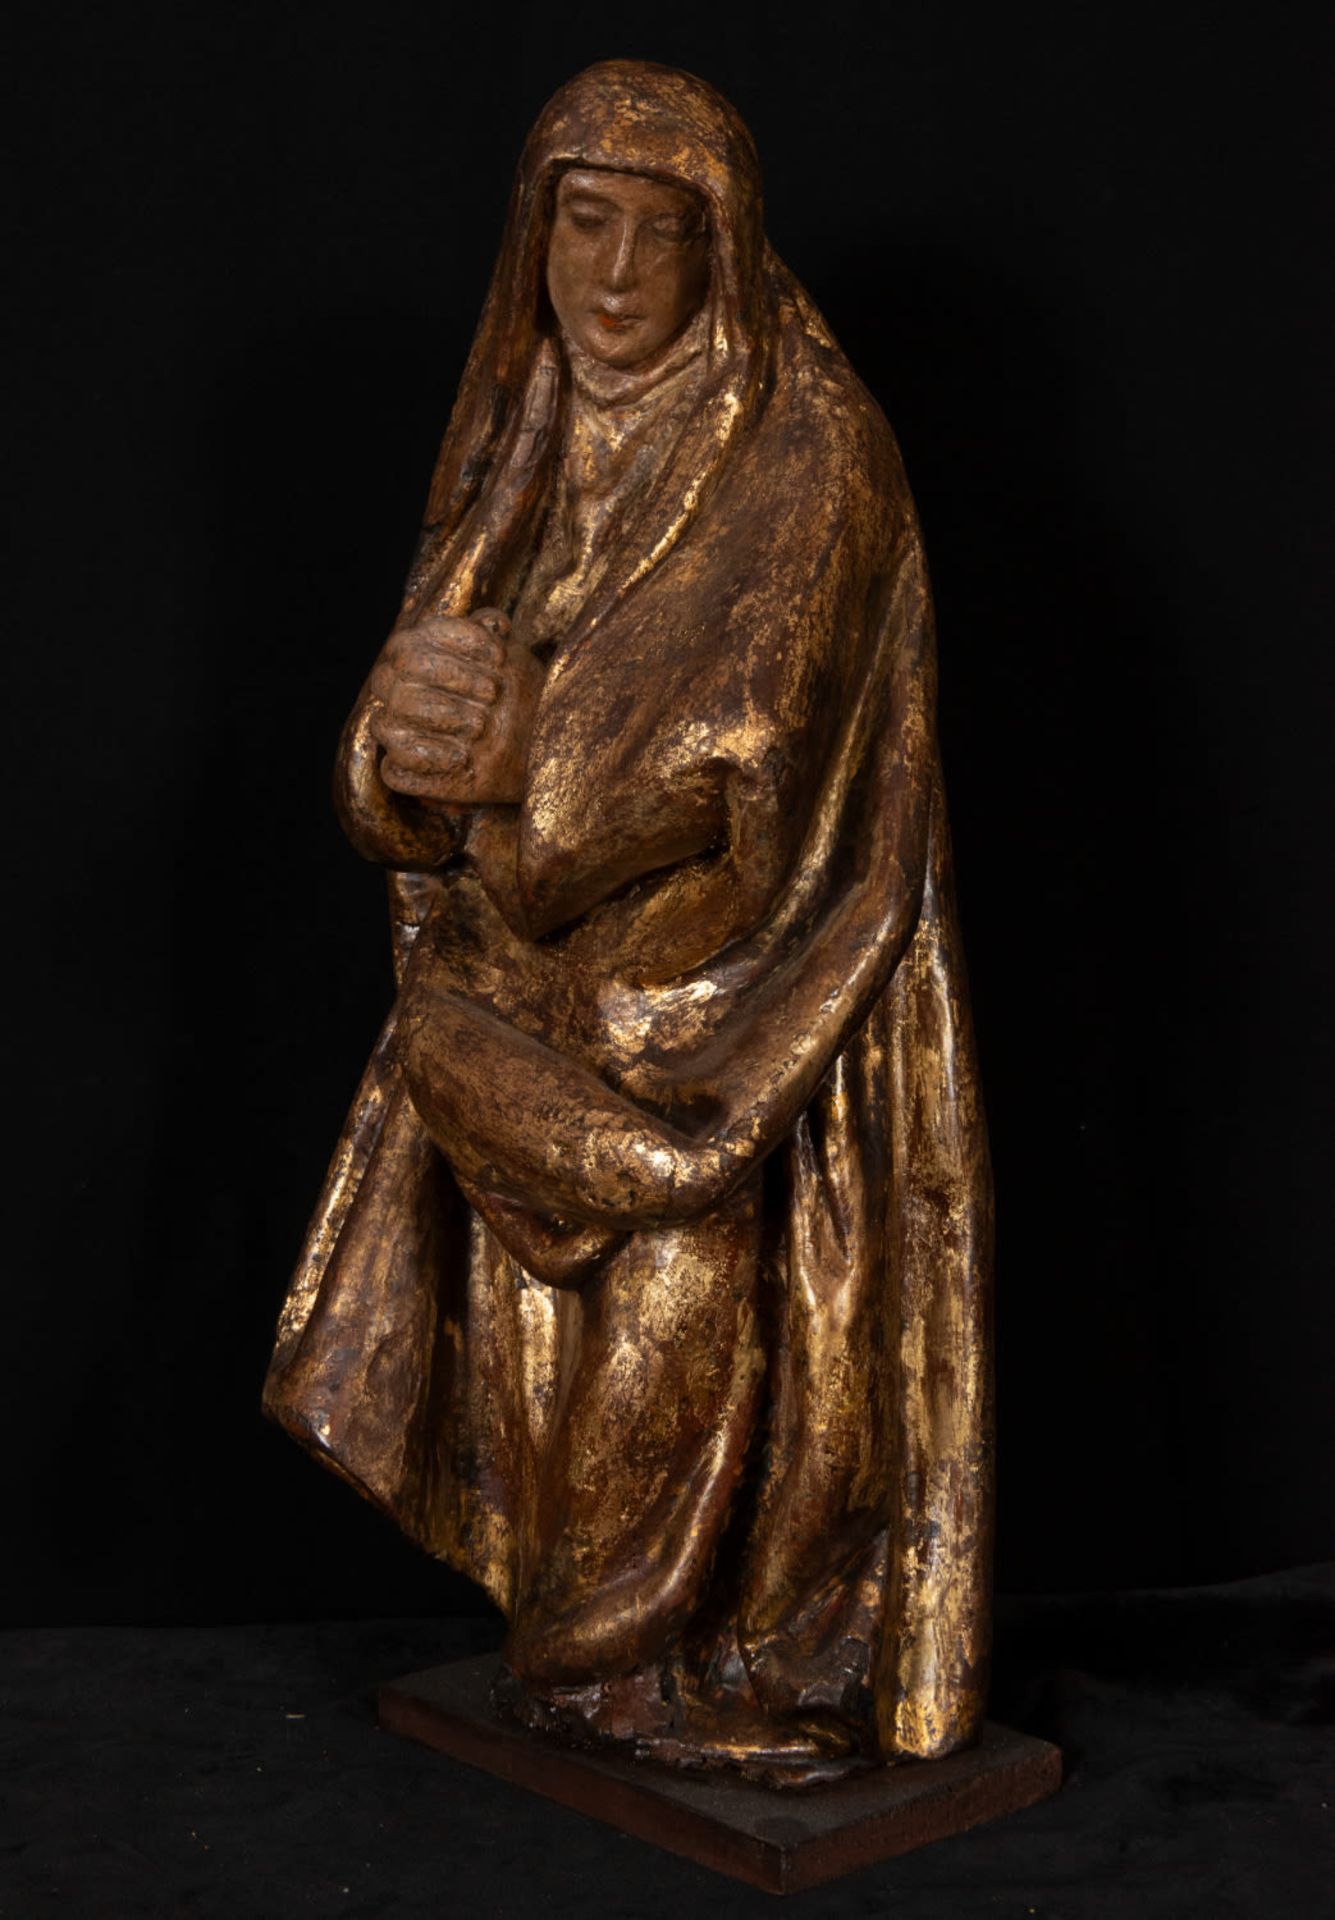 Dolorosa in polychrome wood, Late Gothic school of Bruges, Belgium, 16th century - Image 2 of 4